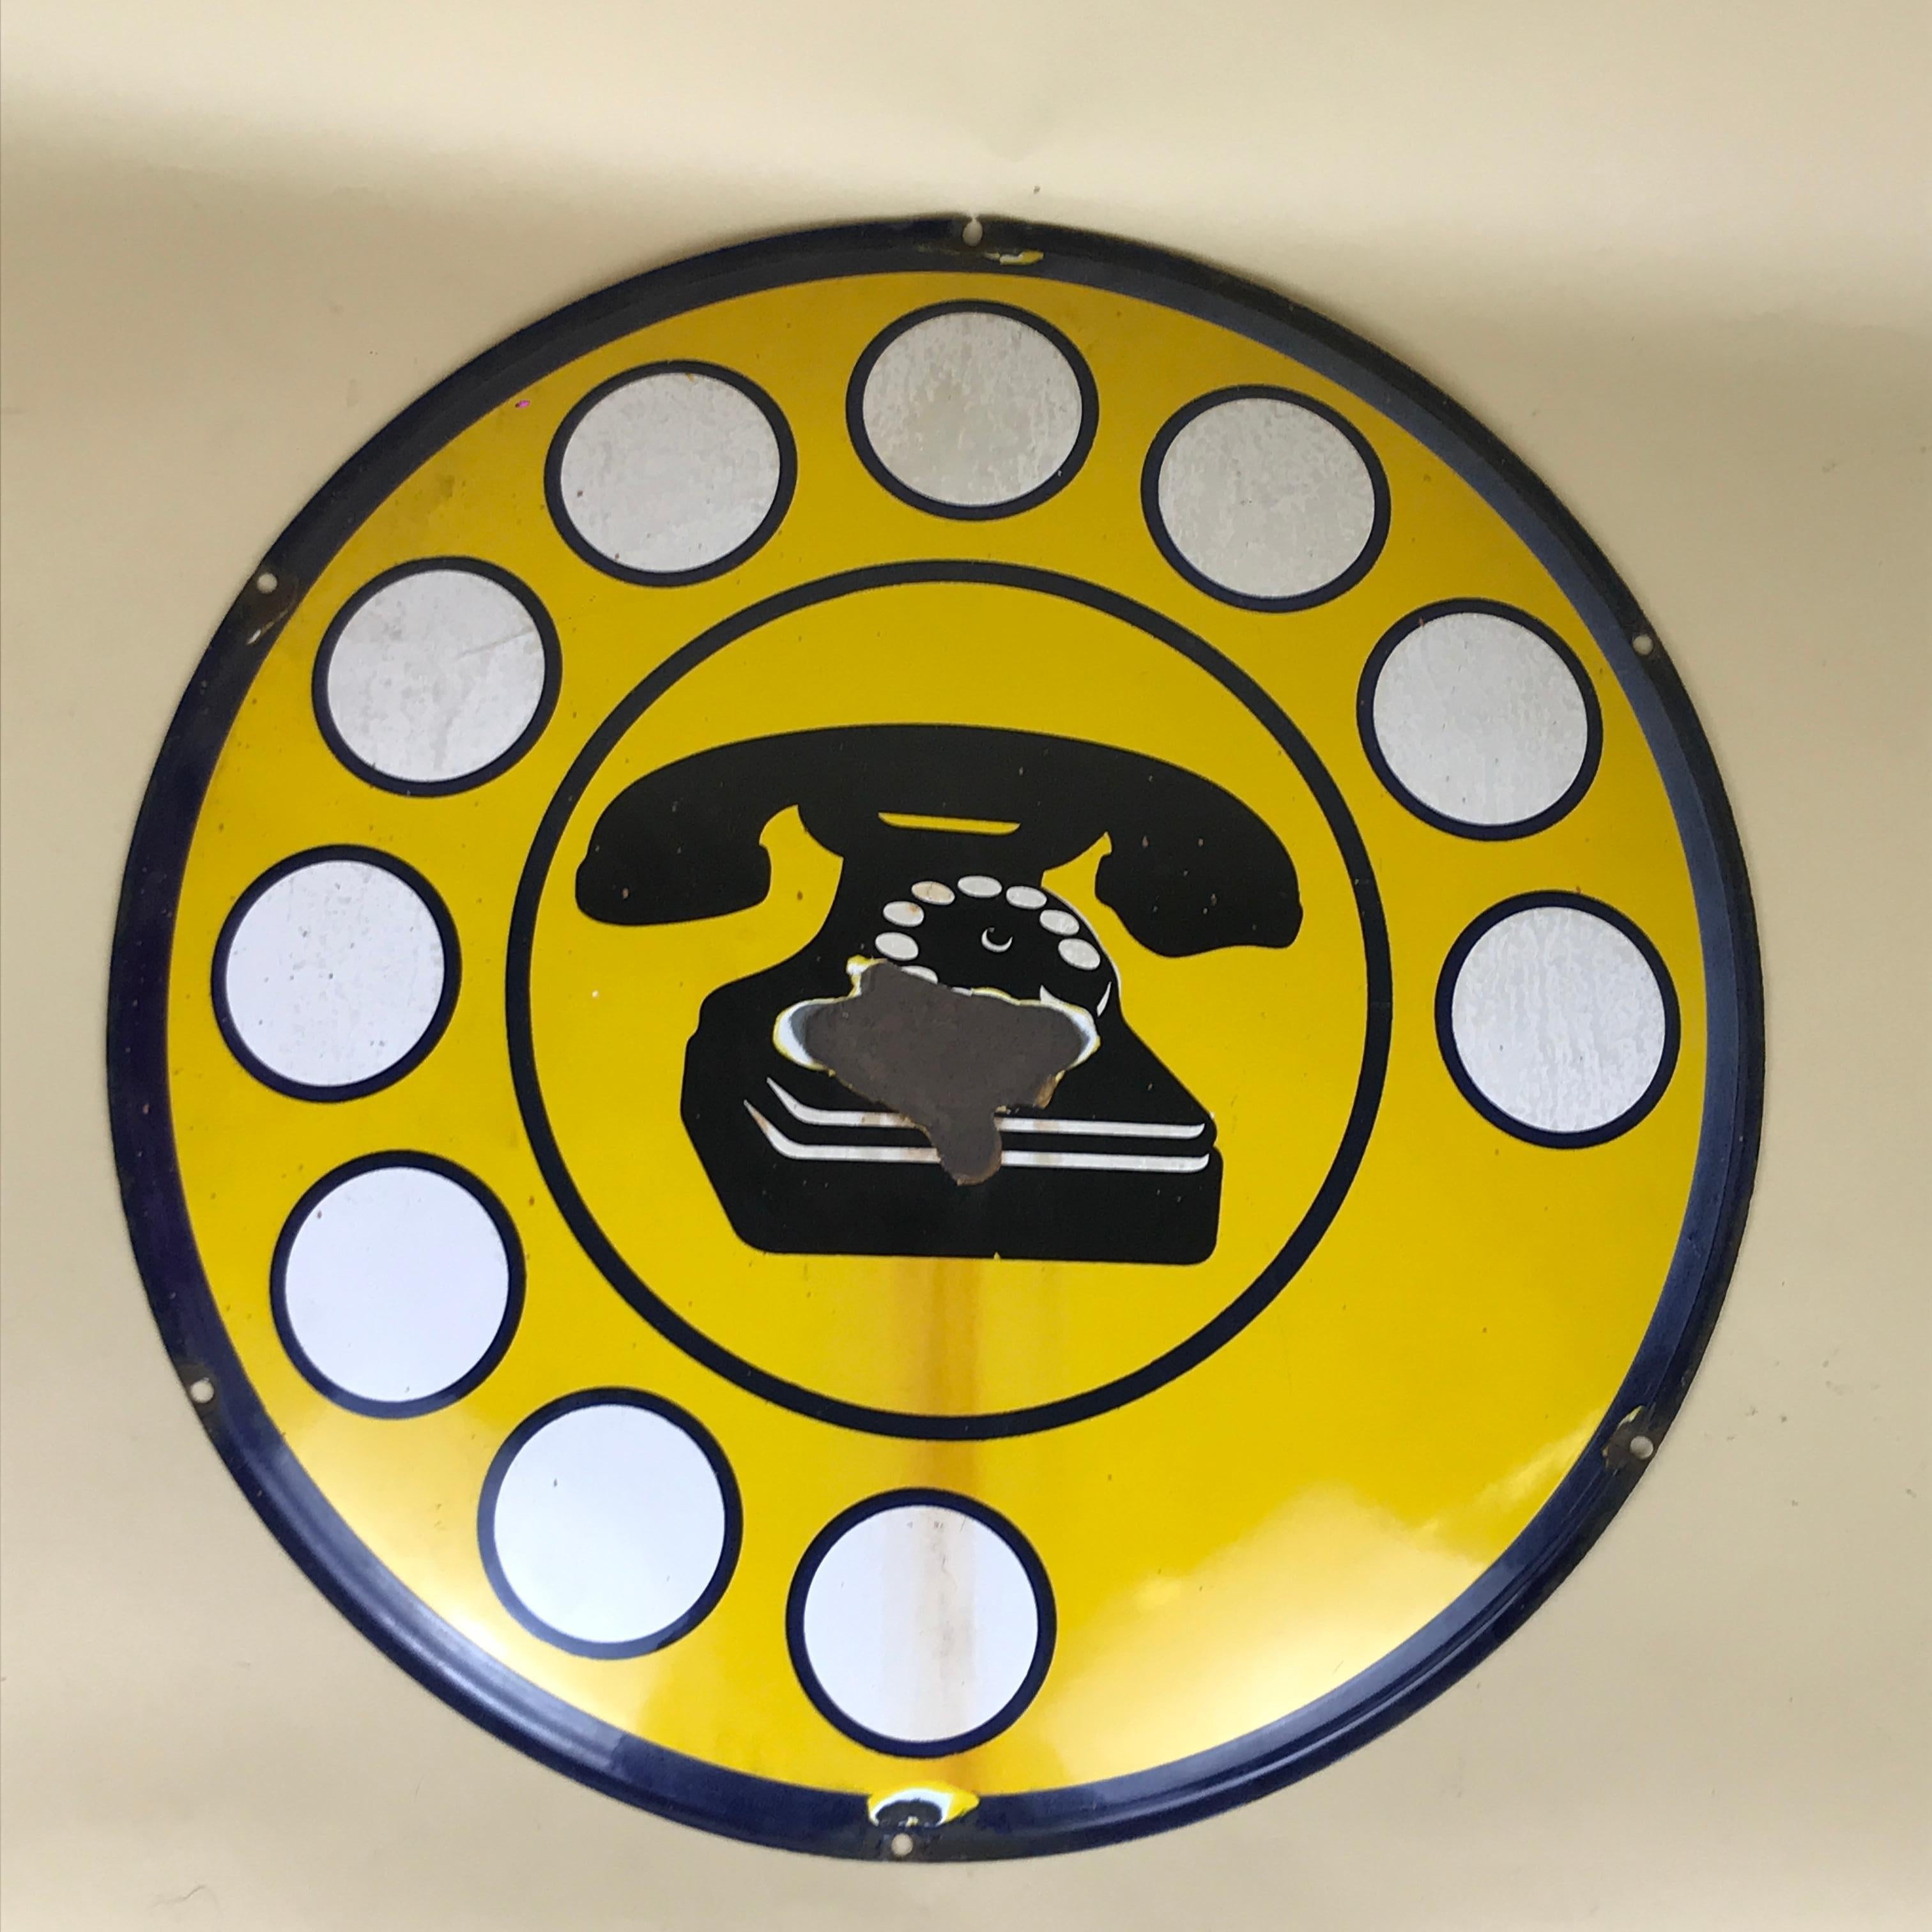 Mid-Century Modern 1970s Yellow Curved Enamel Metal Vintage Italian Telephone Sign, Sip For Sale